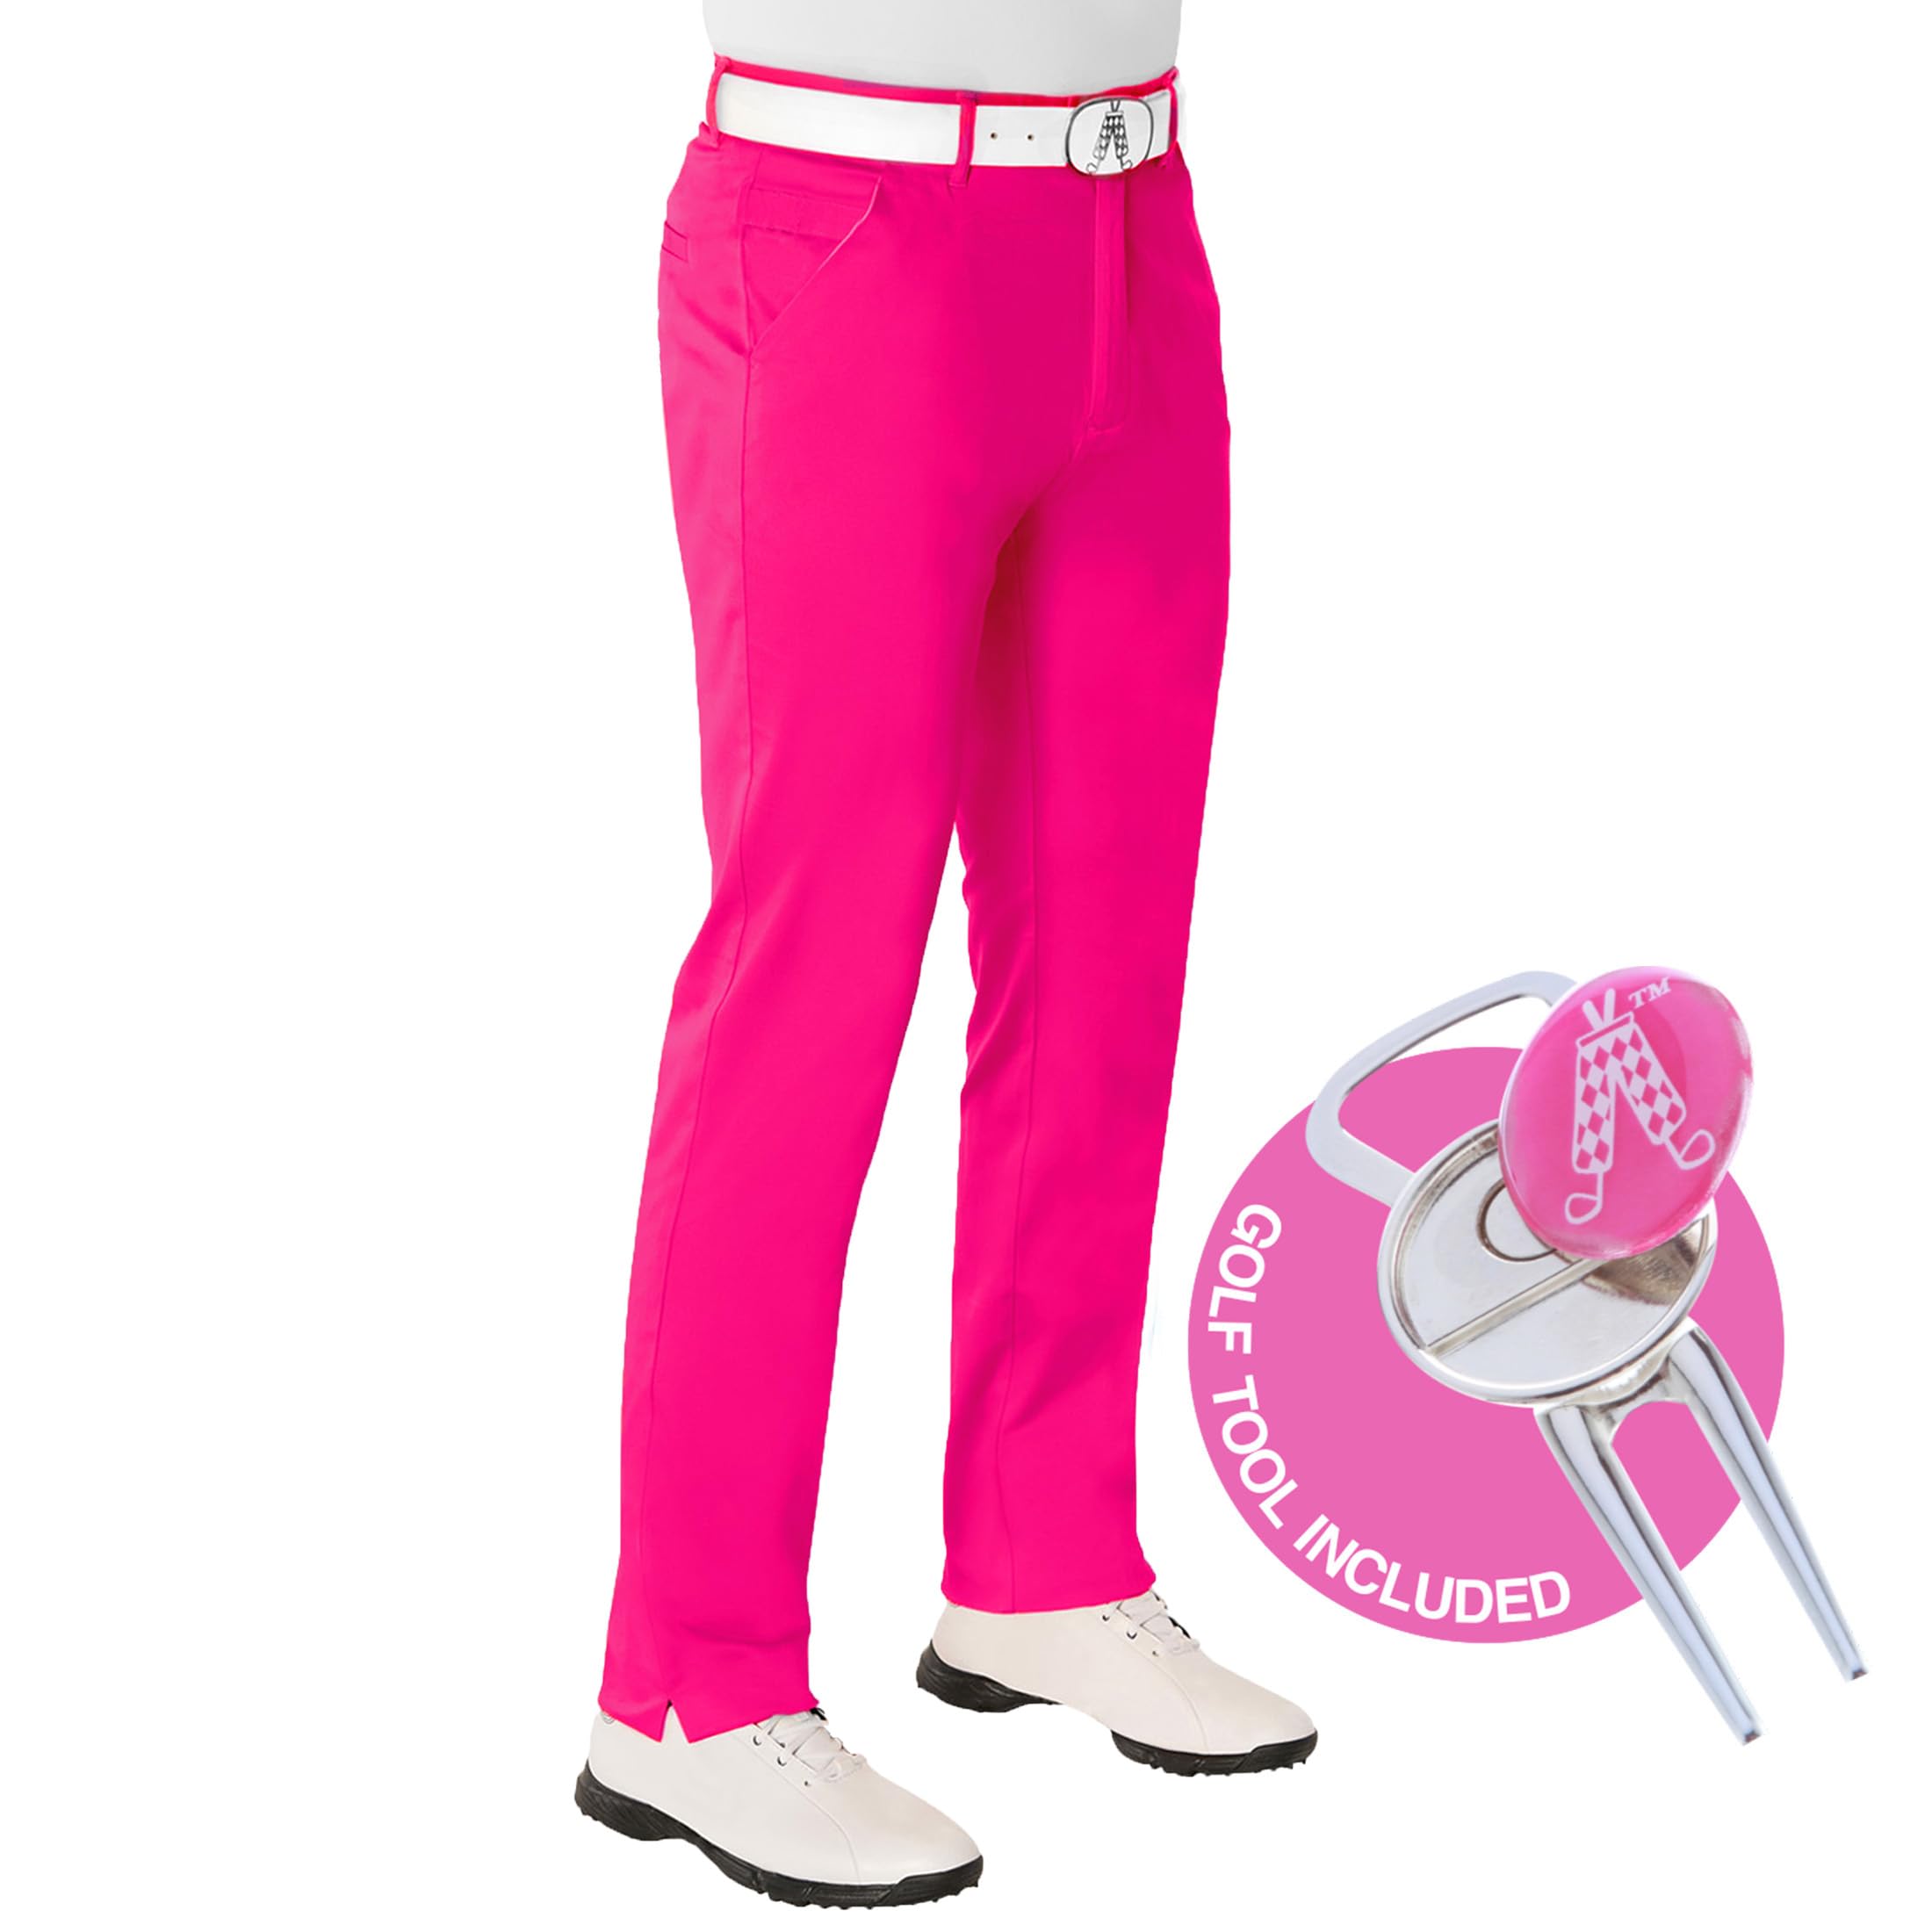 ROYAL & AWESOME HERREN-GOLFHOSE, Rosa (Pink Ticket), W34/L34